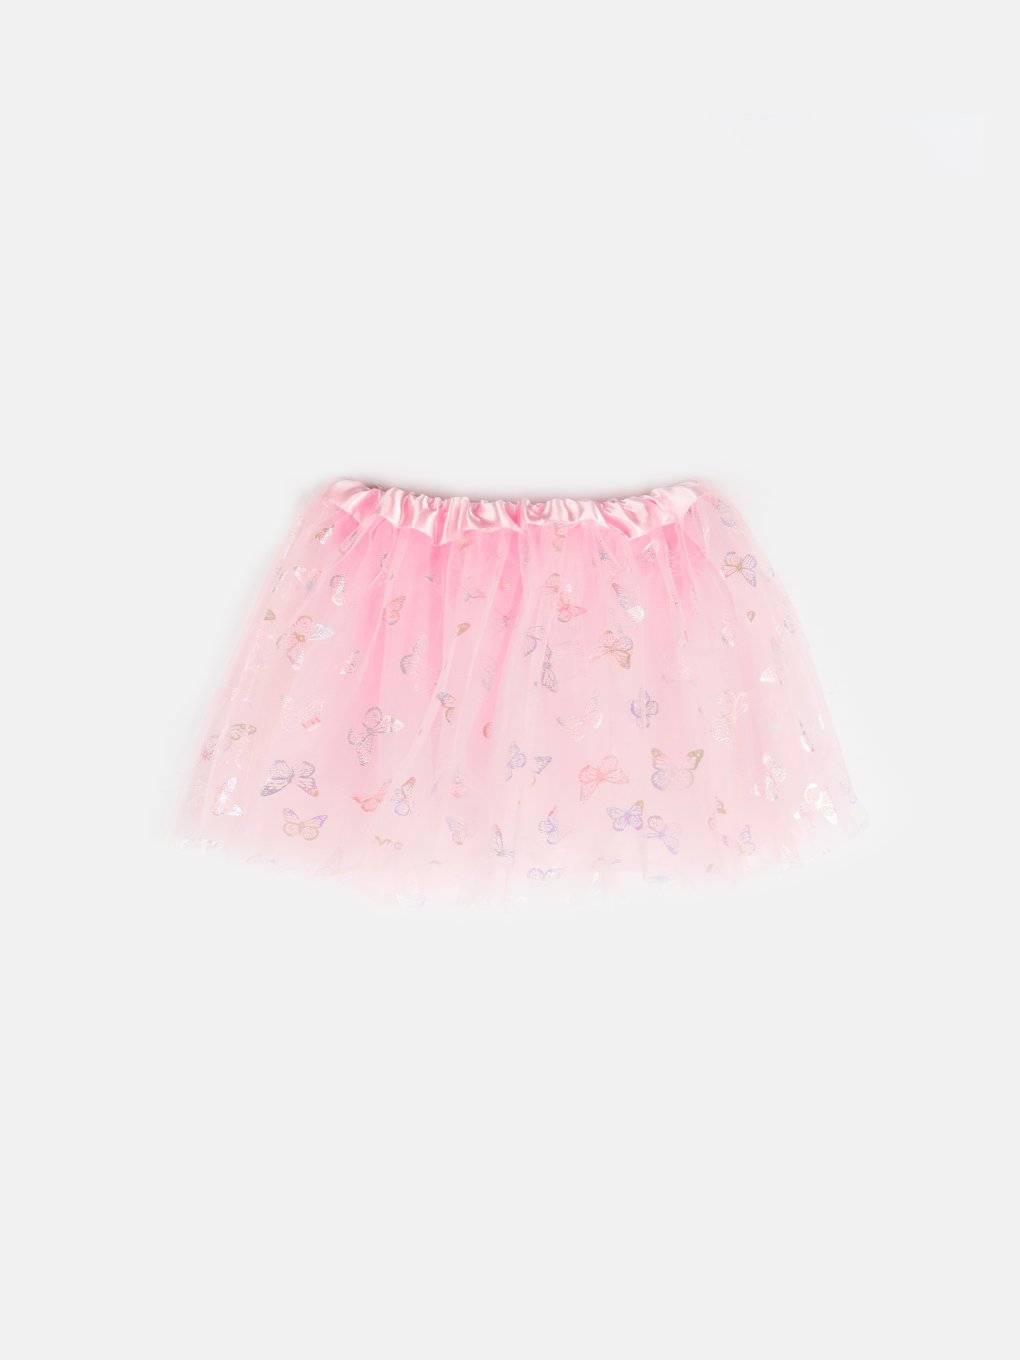 Tulle skirt with silver print